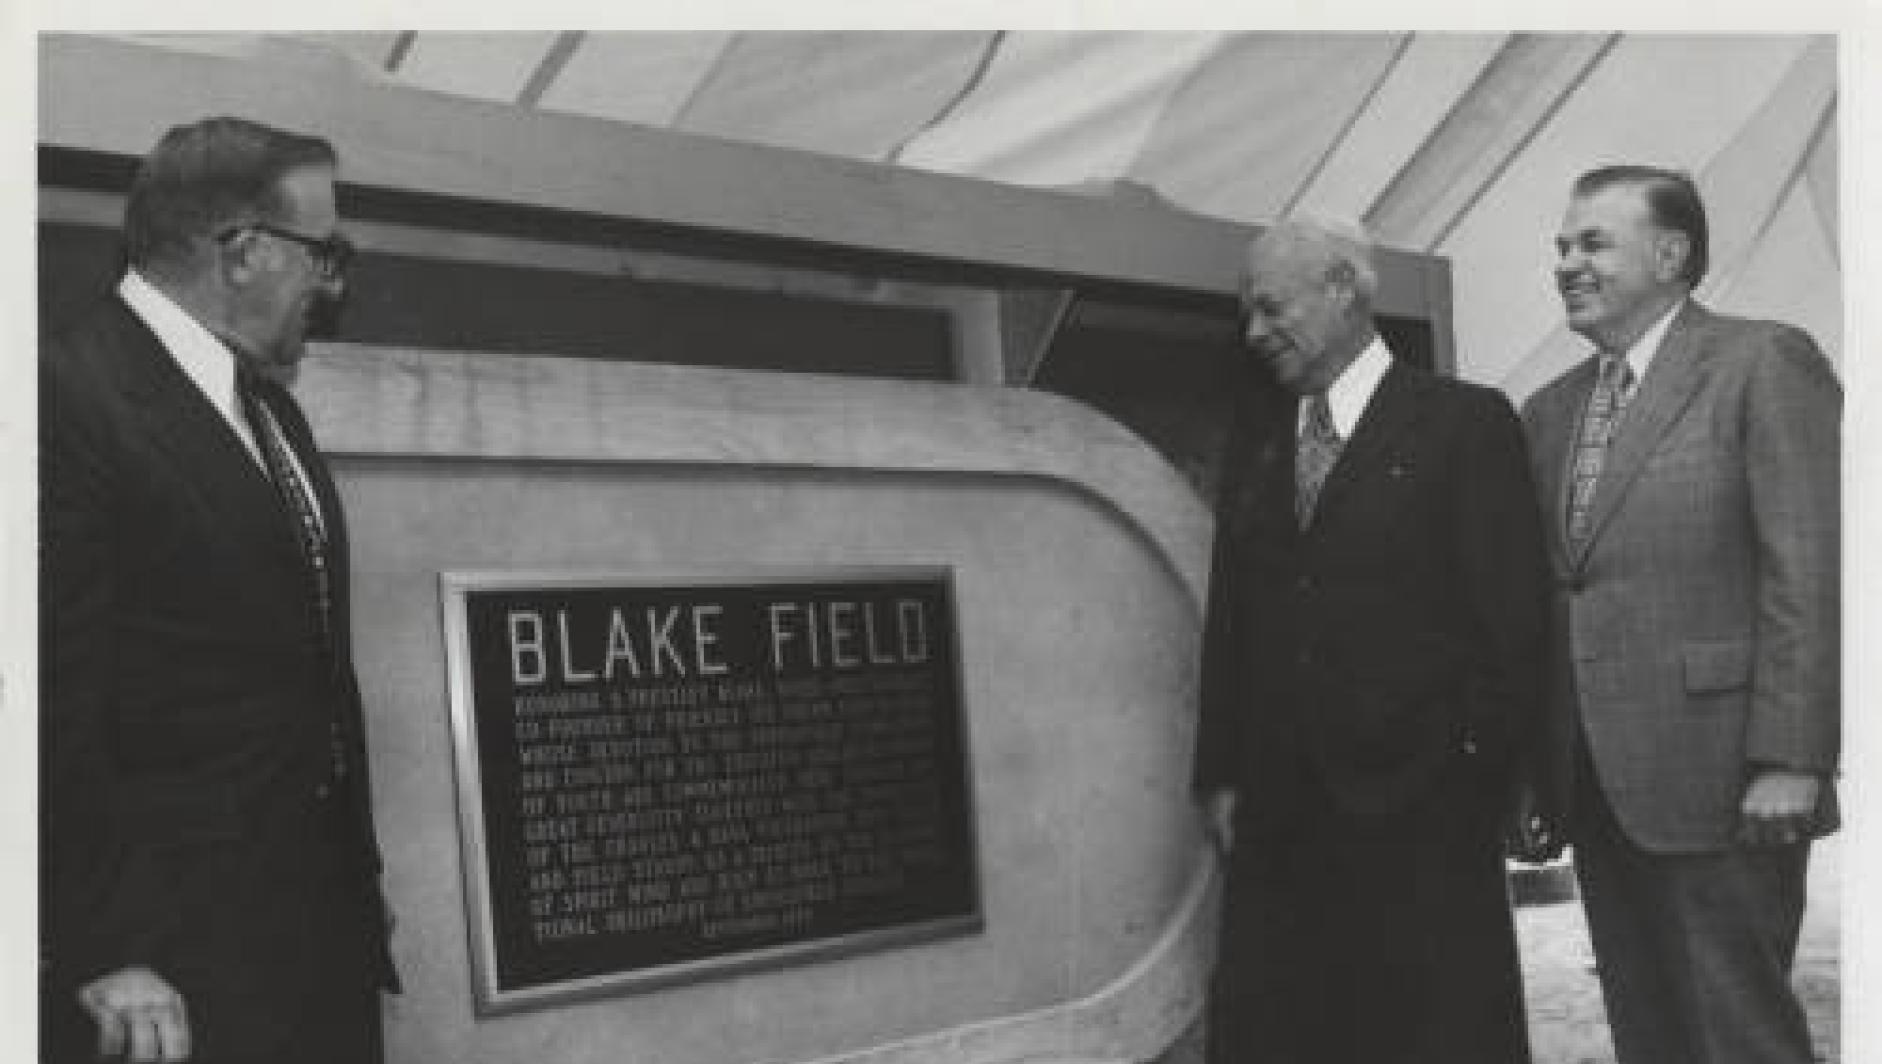 Looking at the Blake field sign